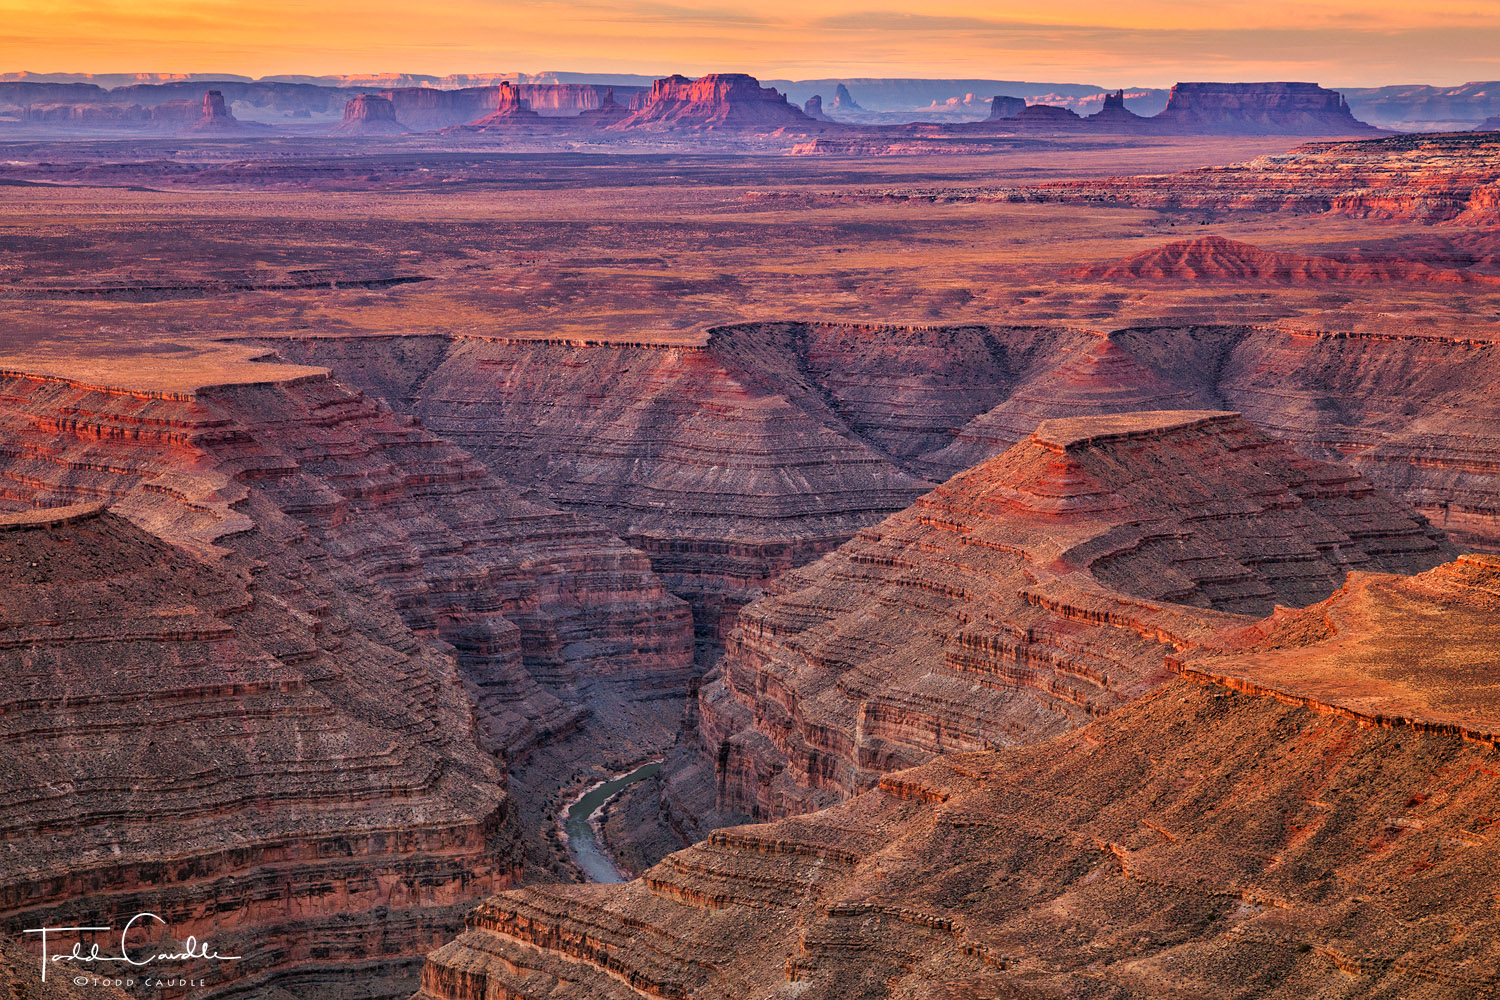 The San Juan River navigates through a series of entrenched meanders, or goosenecks, through layered canyon walls.